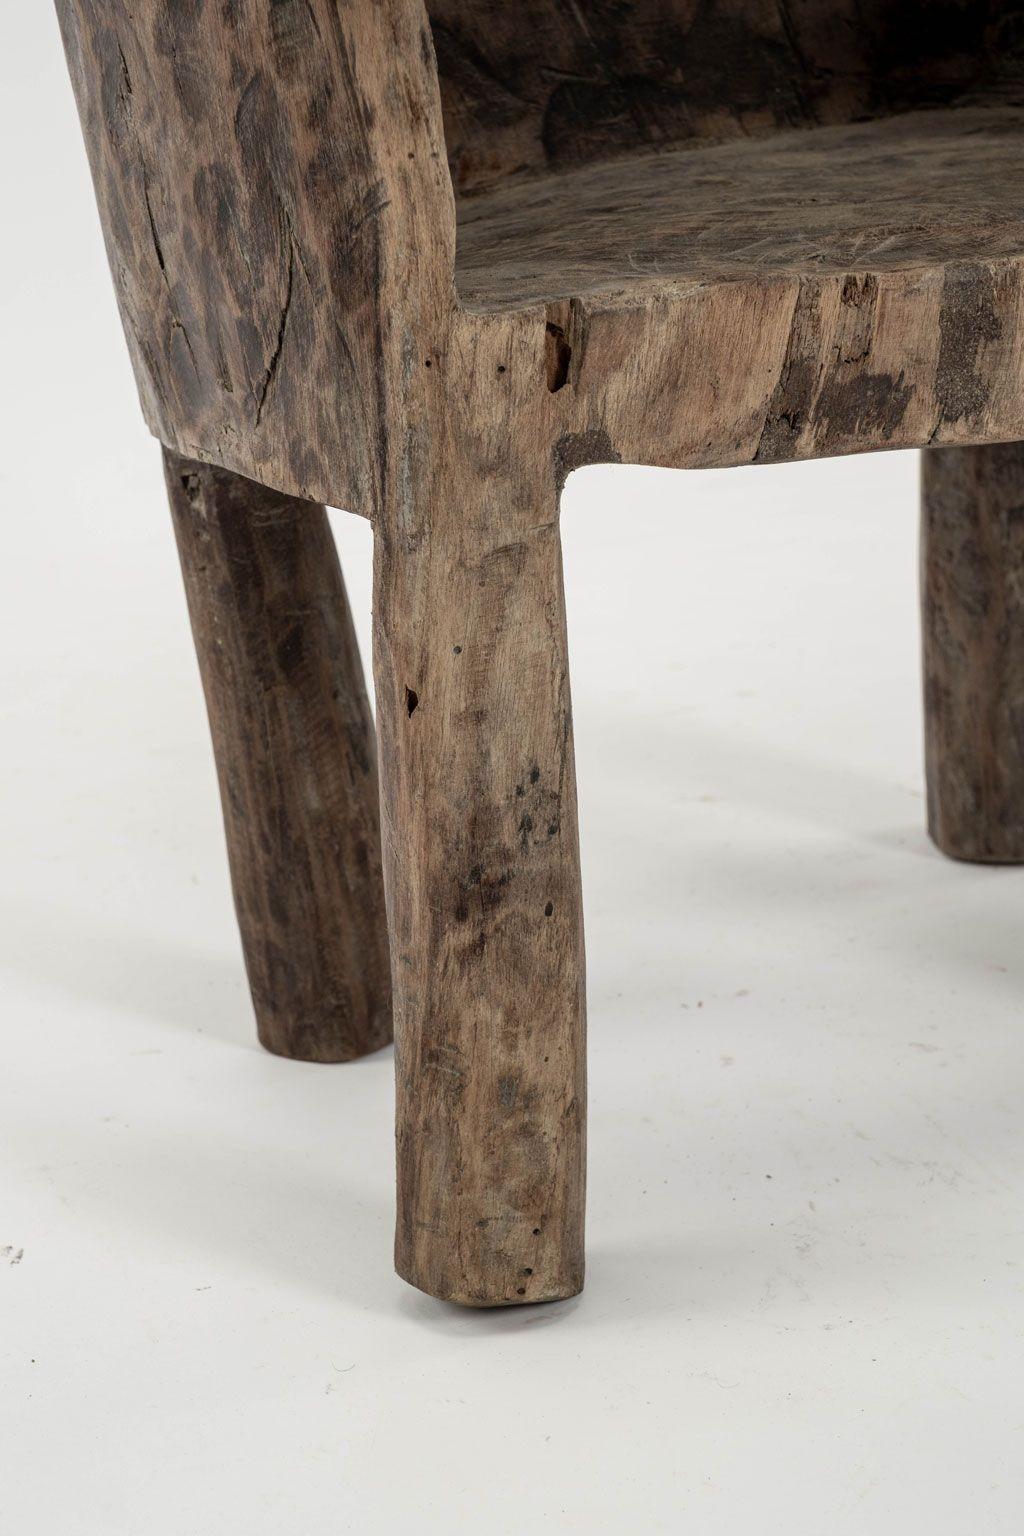 Primitive dug-out chair from Southeast Asia. Hand-carved from sold piece of hardwood.

Note: Regional differences in humidity and climate during shipping may cause antique and vintage wood to shrink and/or split along its grain, veneer to loosen